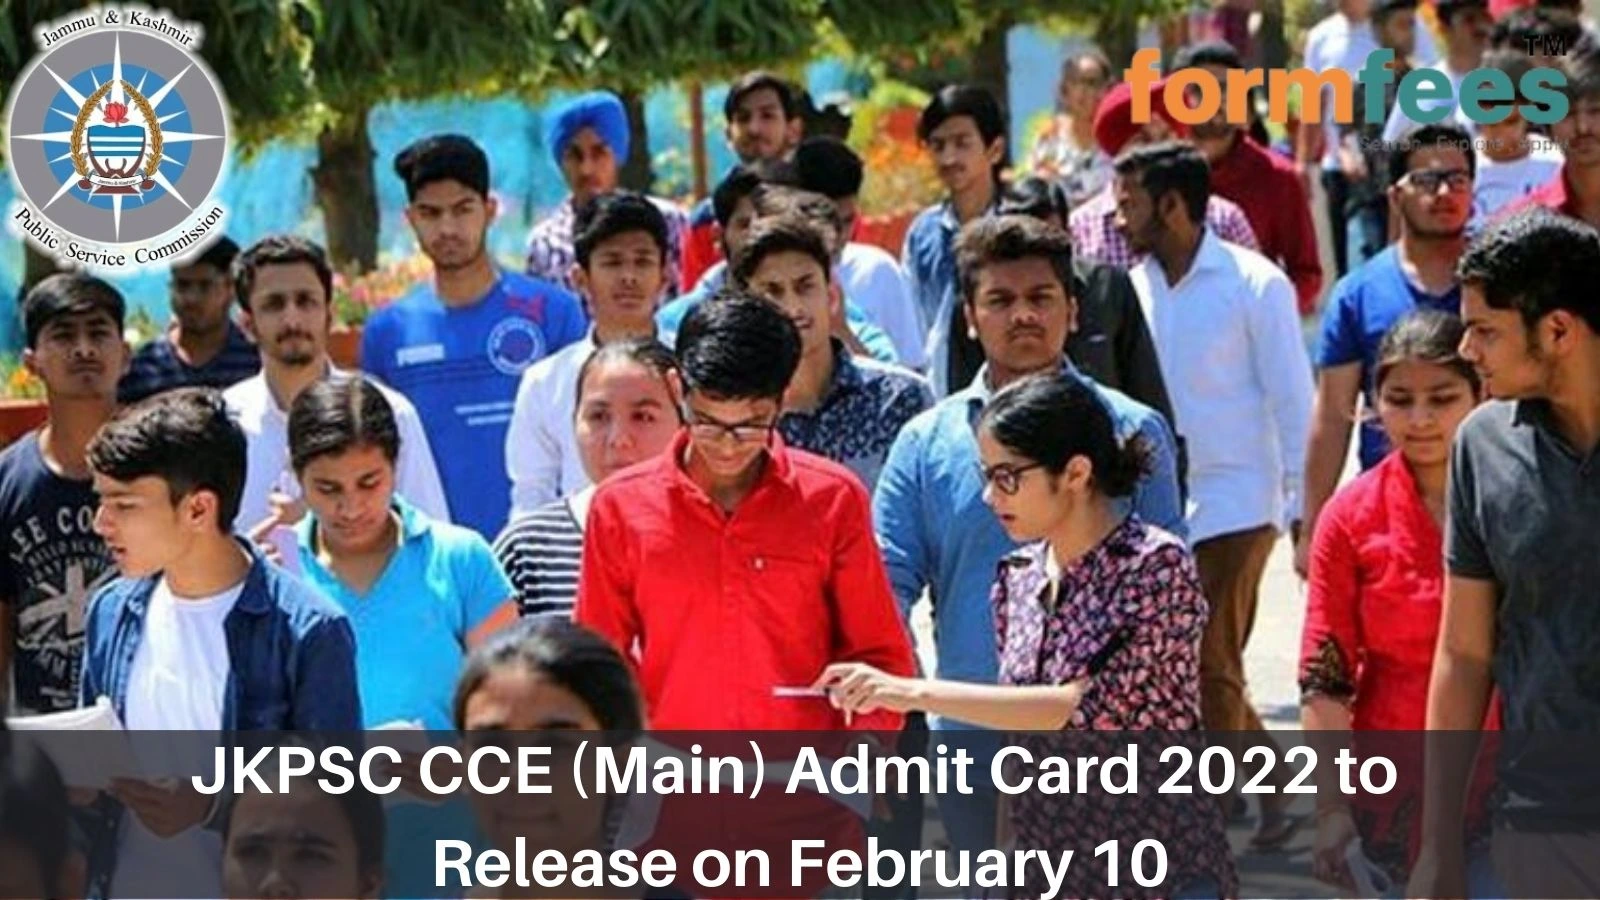 JKPSC CCE (Main) Admit Card 2022 to Release on February 10